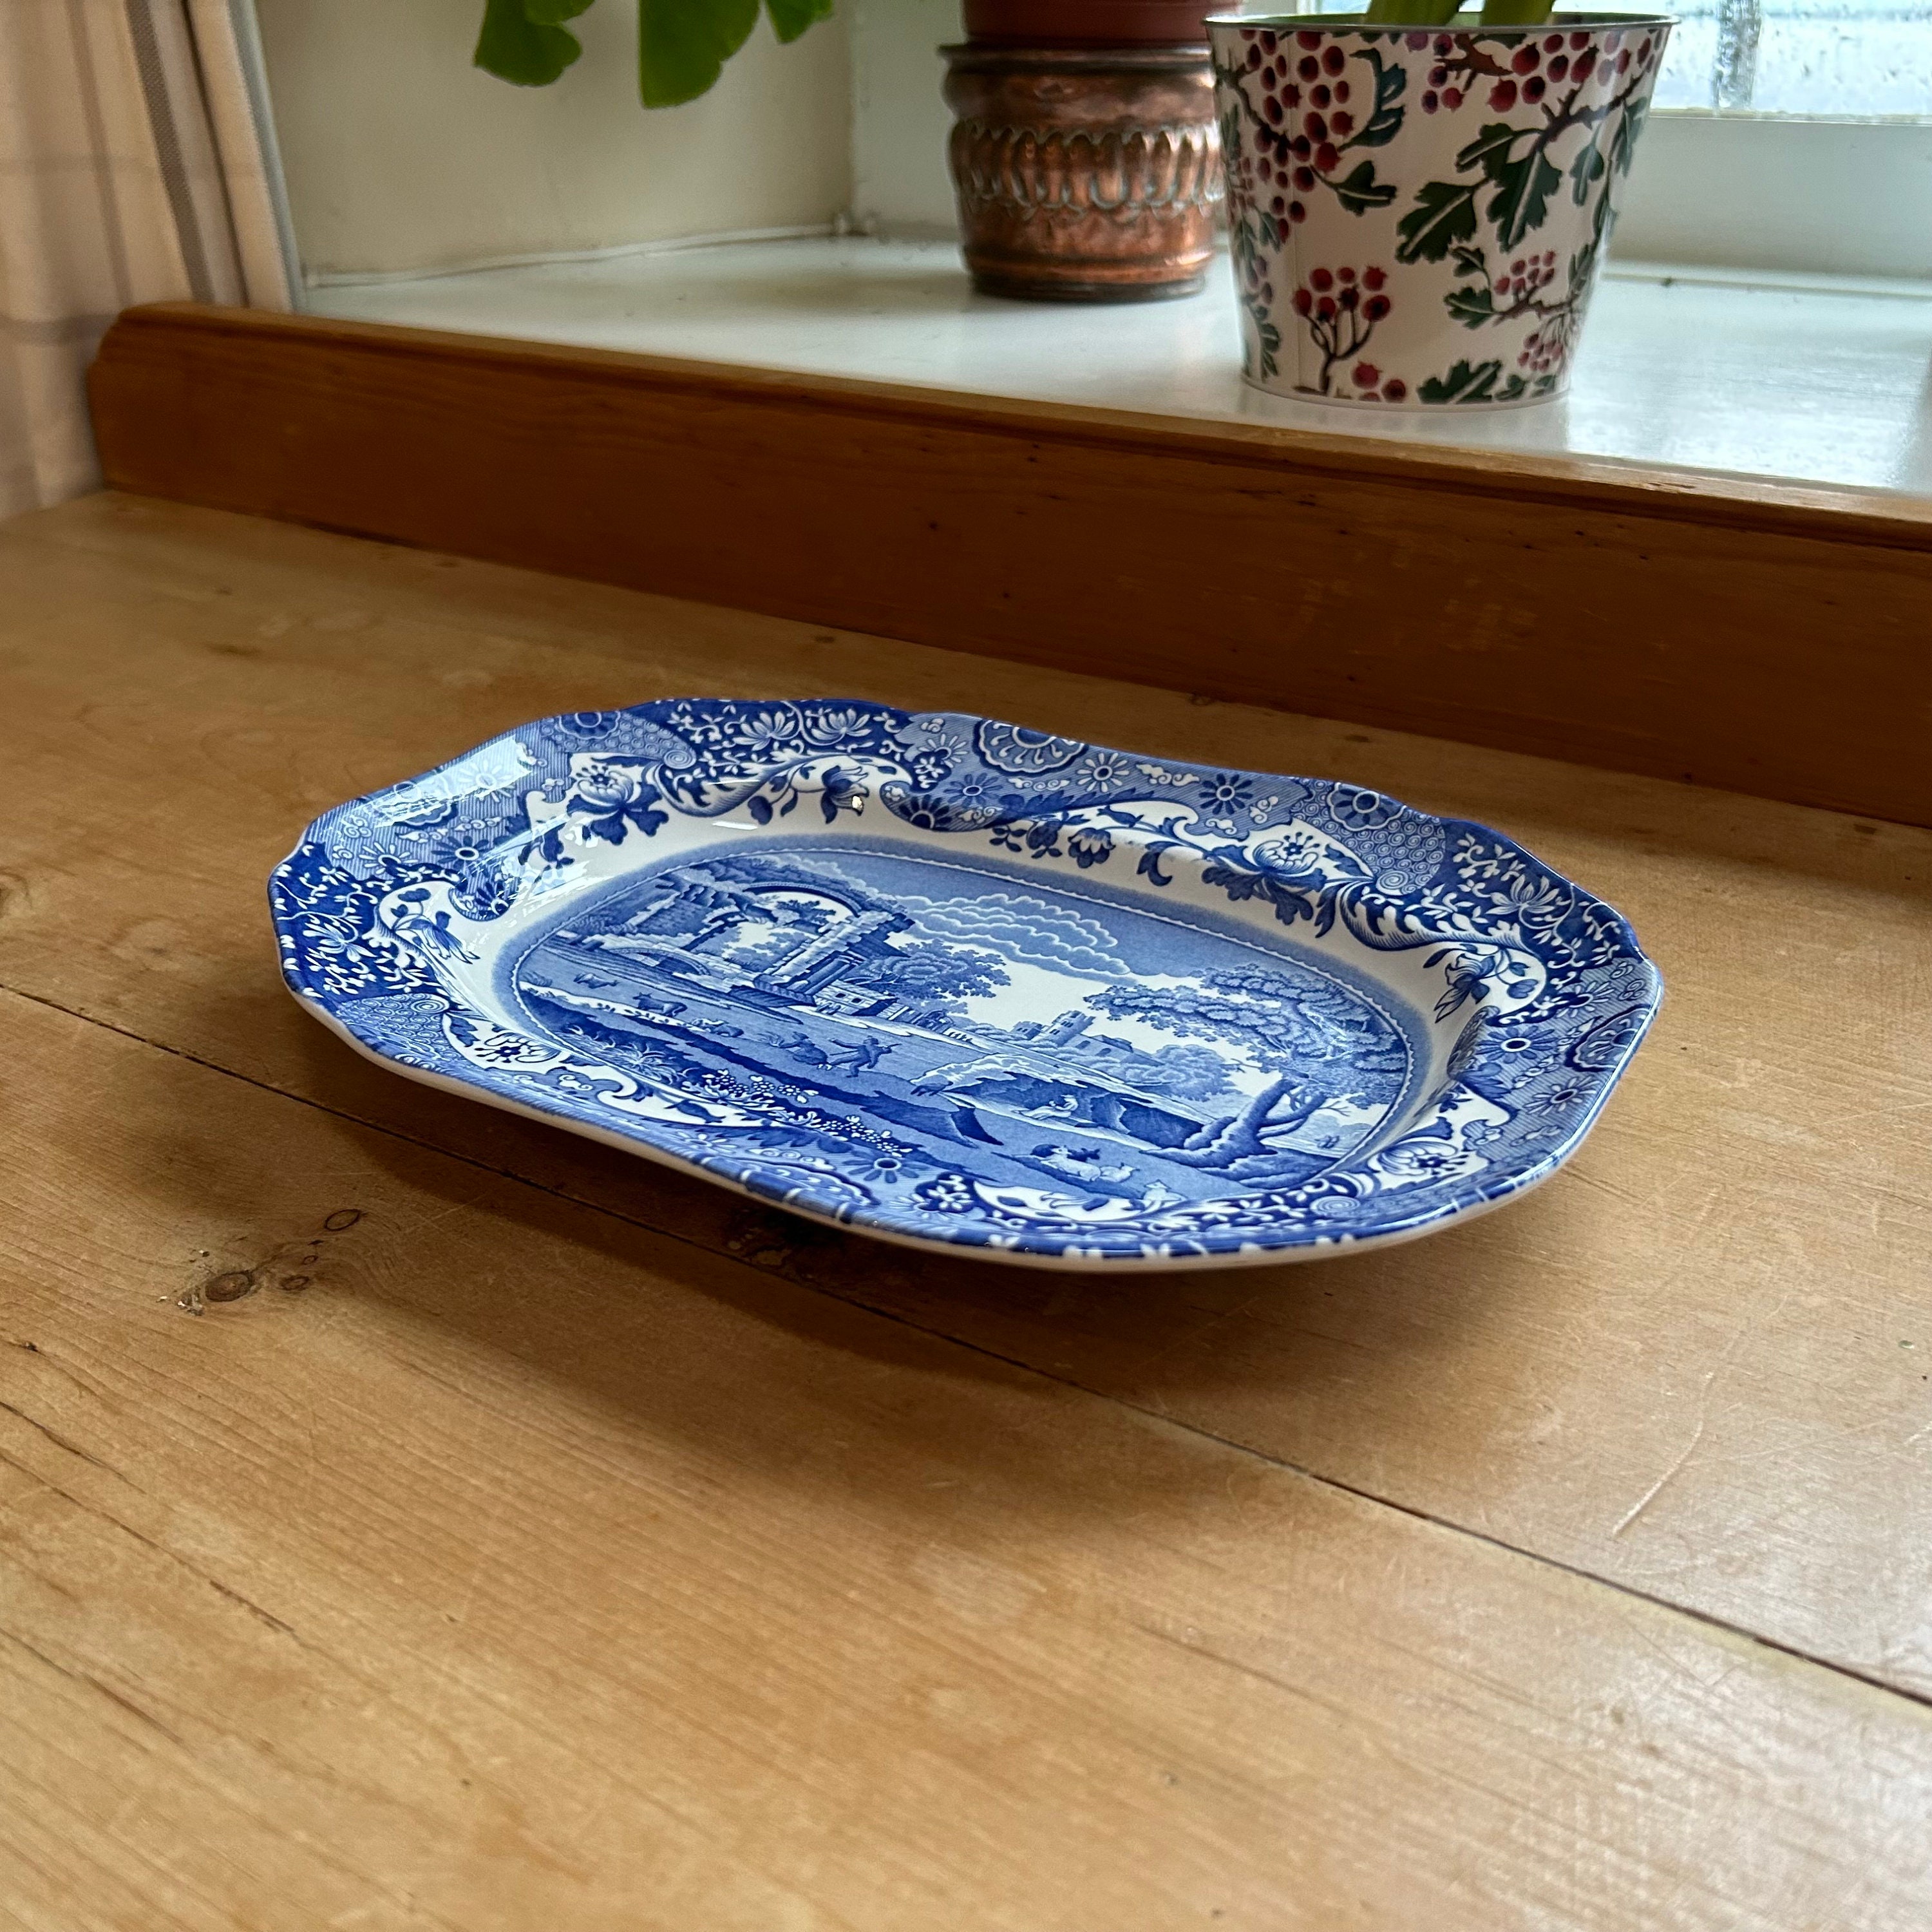 Late 20th Century Spode Christmas Tree Round Oven to Table Baking Dish